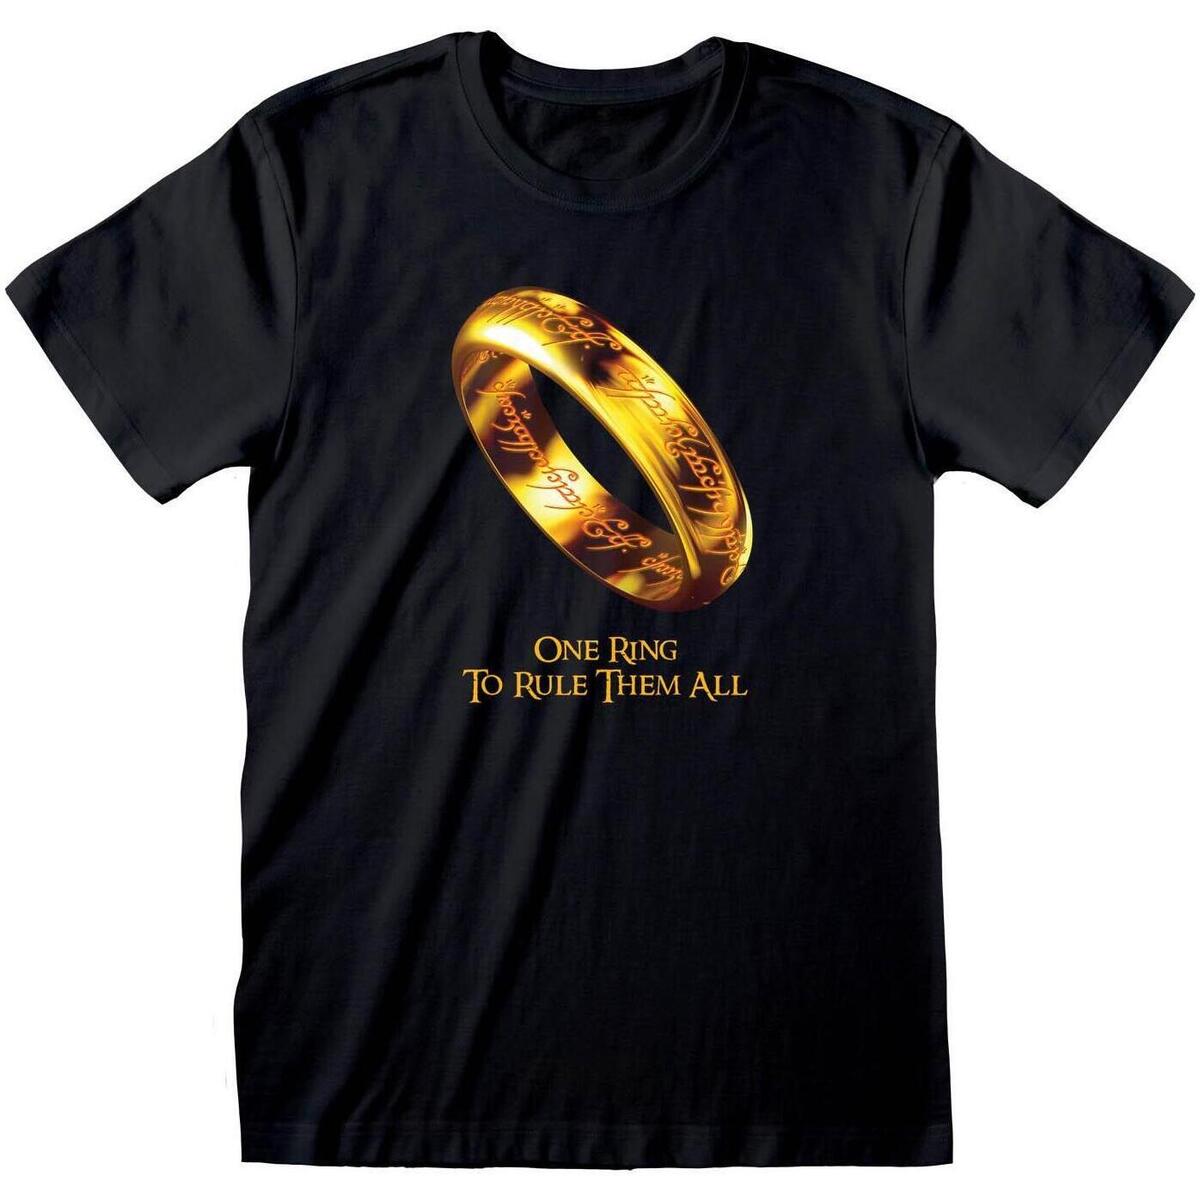 Vêtements T-shirts manches longues Lord Of The Rings One Ring To Rule Them All Noir